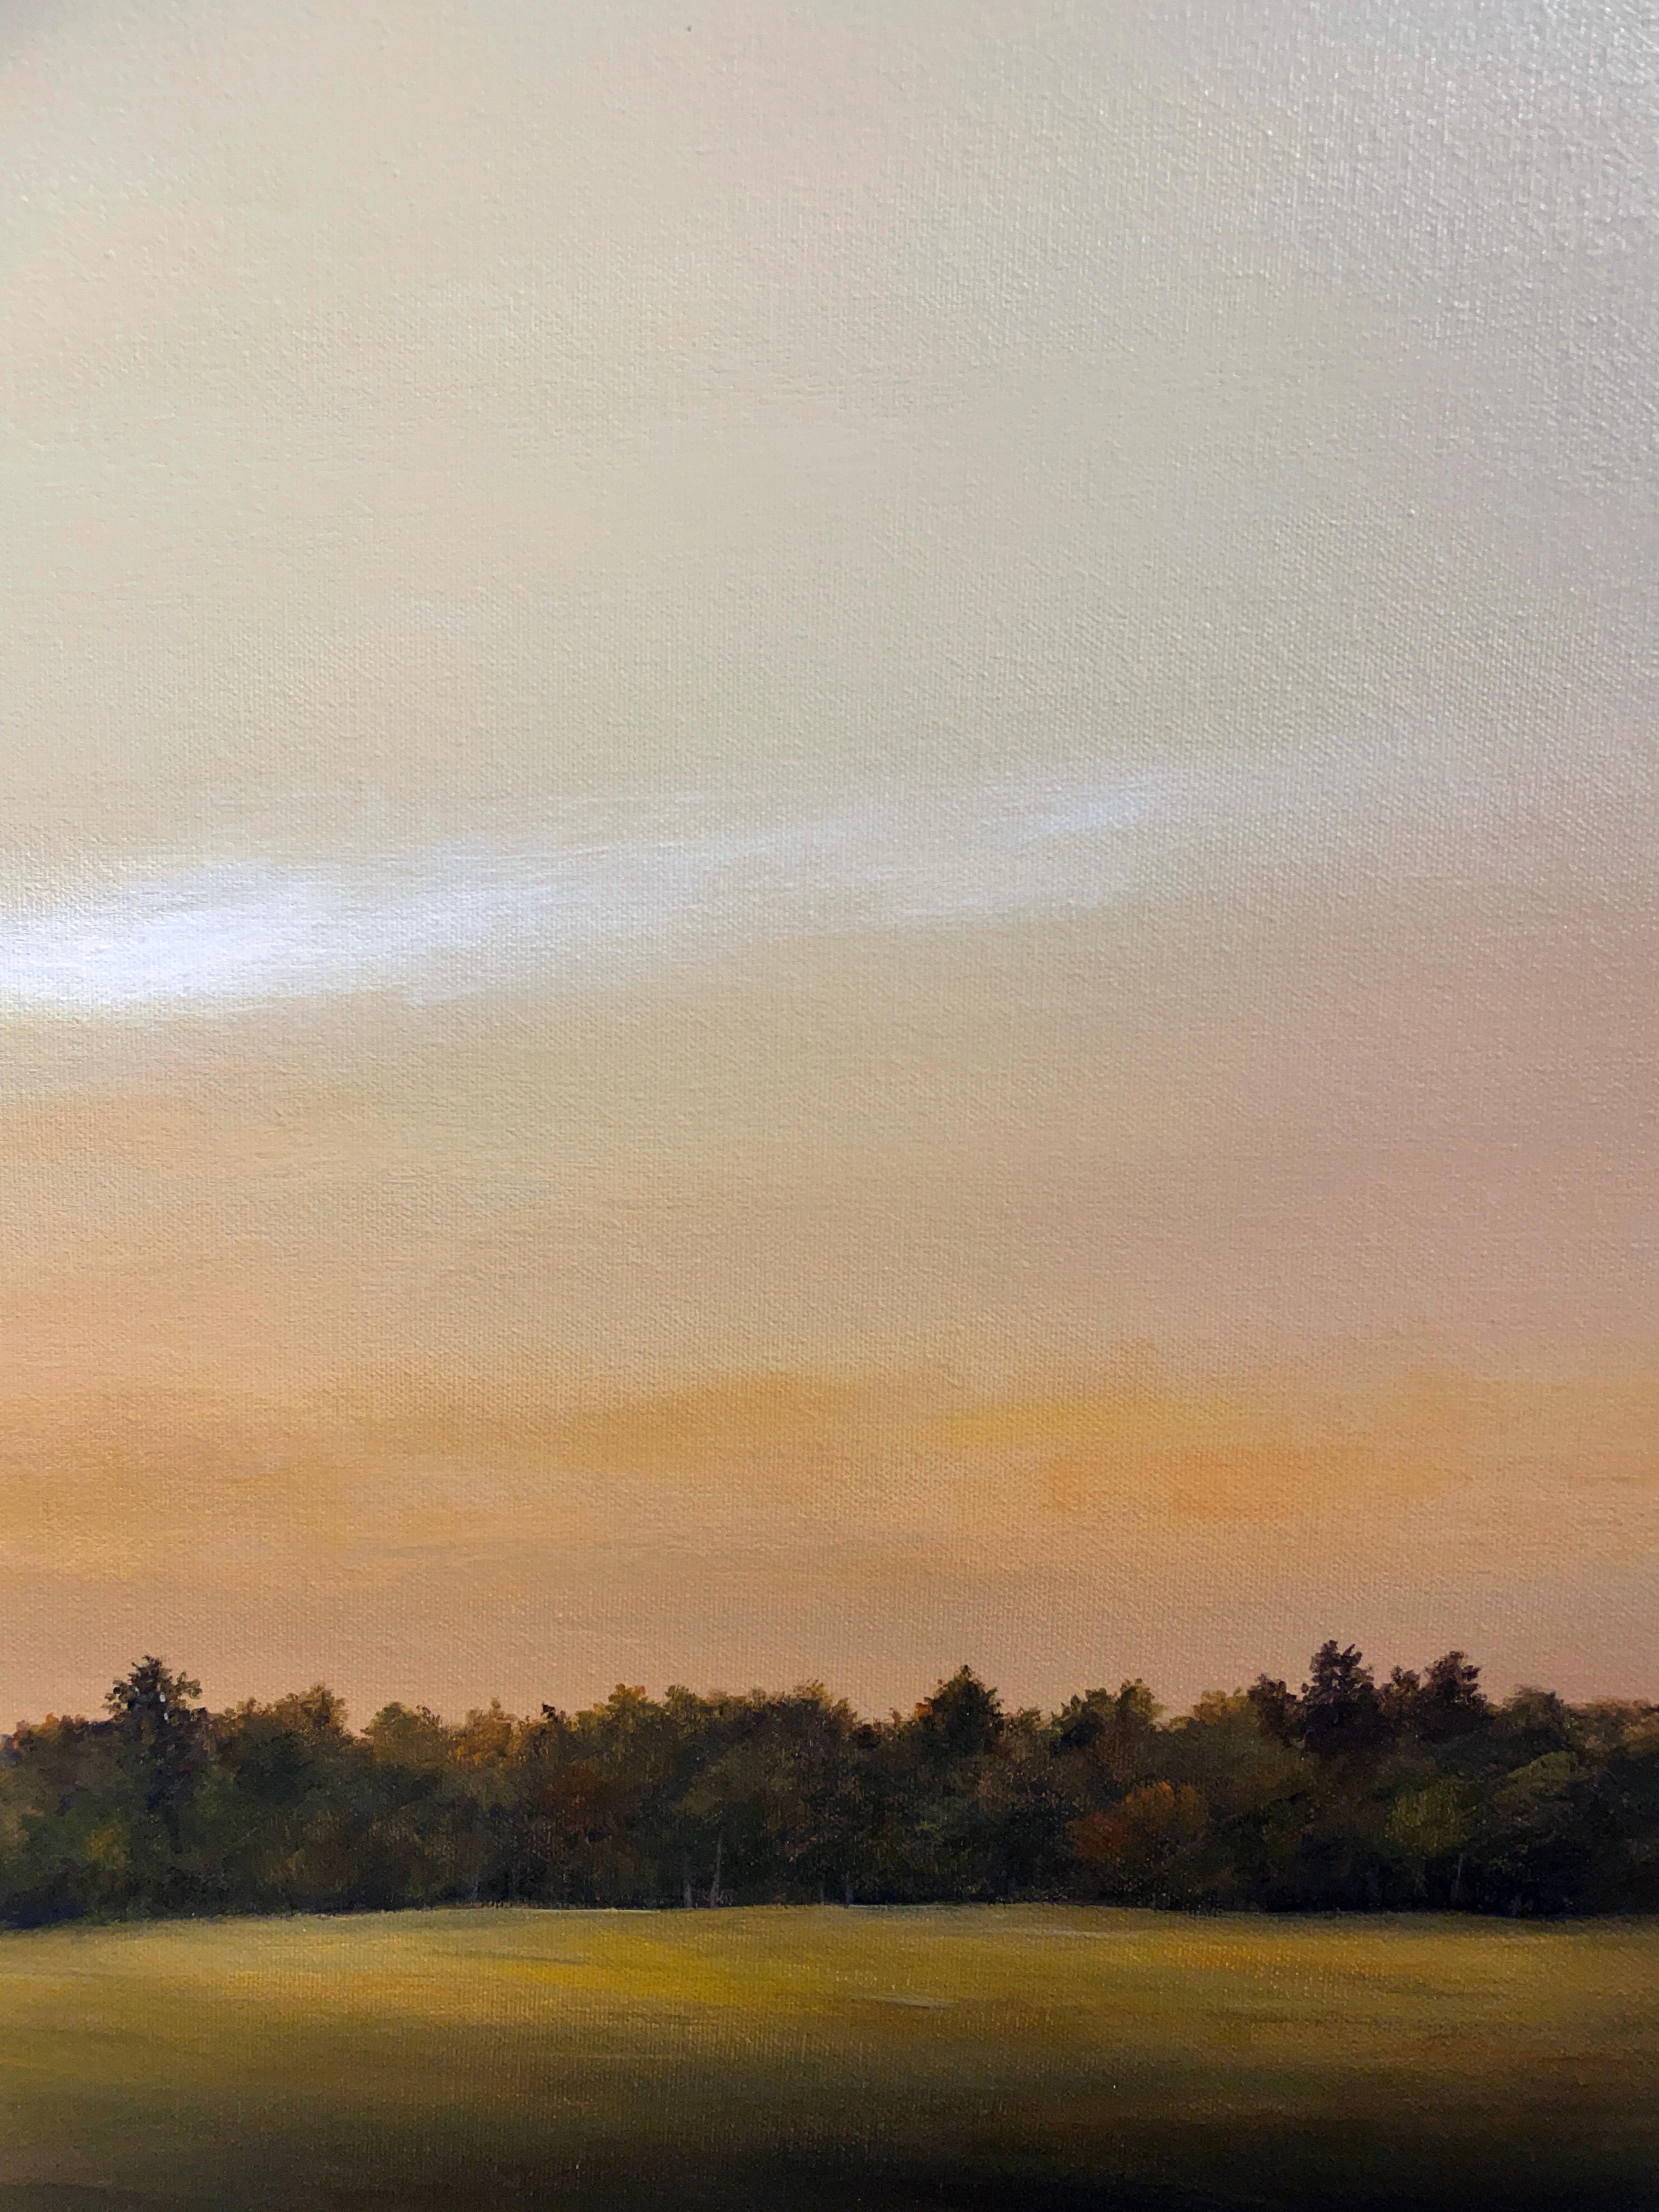  November Overlook, Expansive Sky in Hues of Gold & Orange, Original Oil, Framed - Contemporary Painting by Ahzad Bogosian